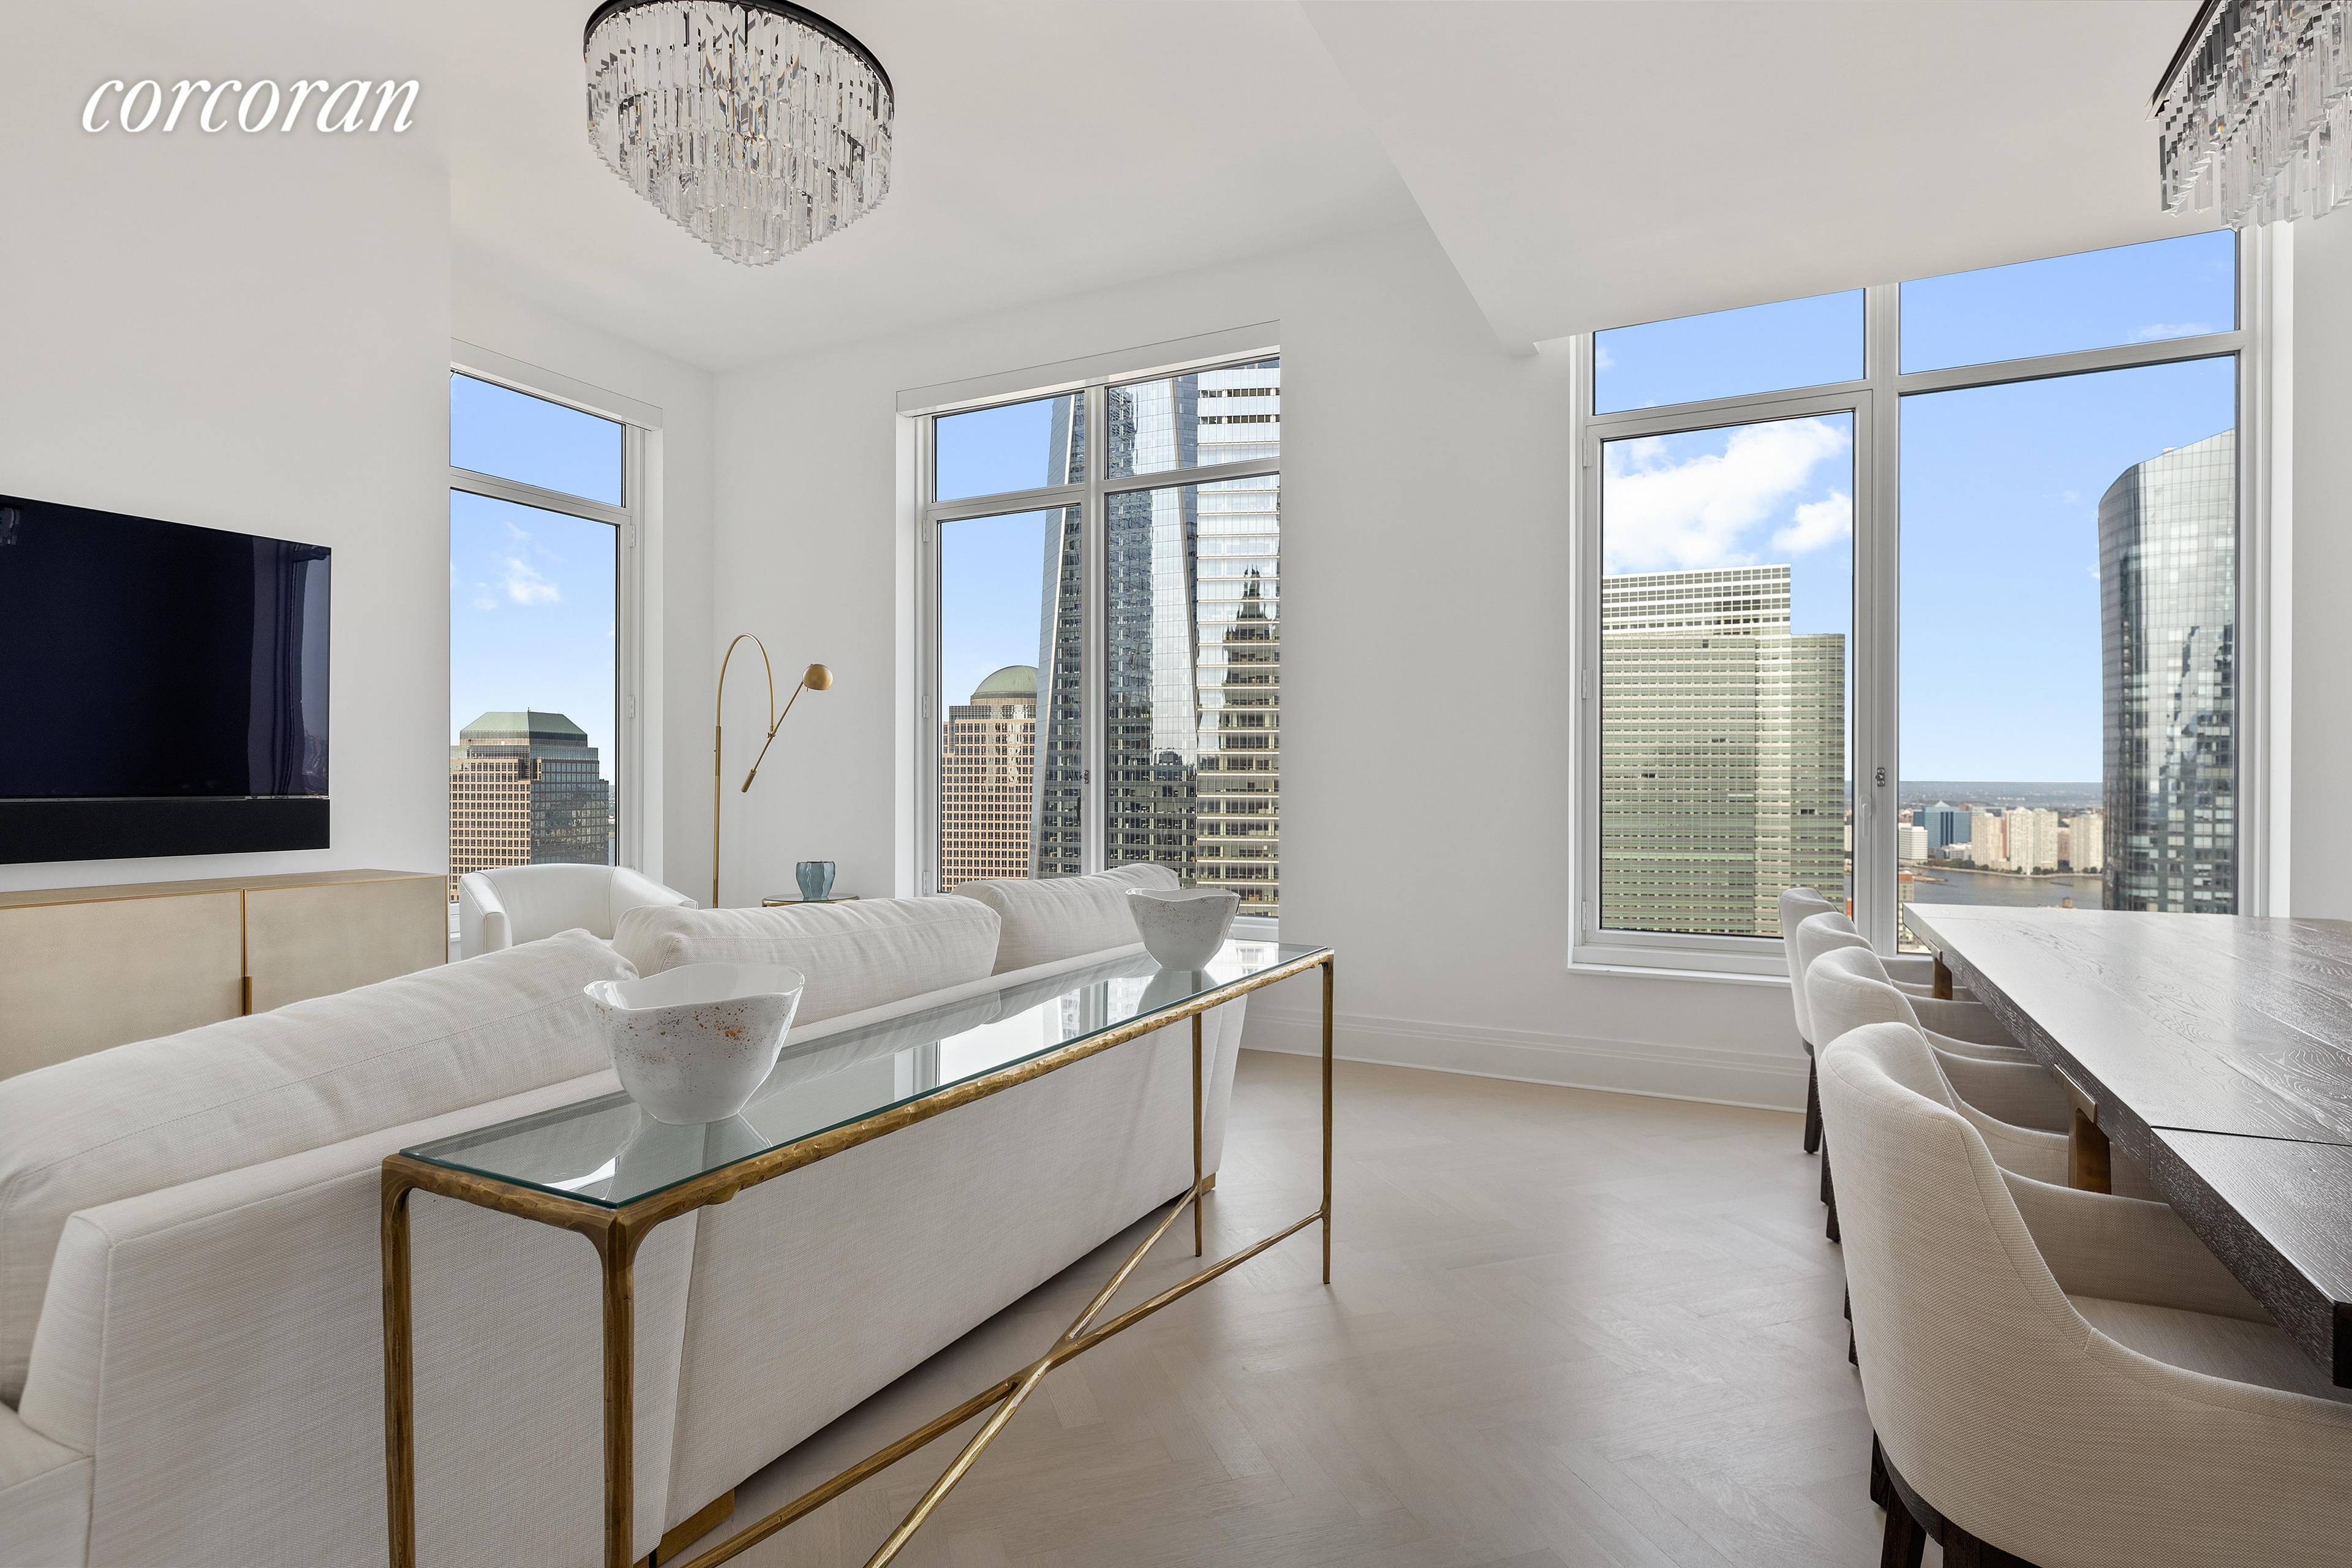 FULLY FURNISHED ! EXCEPTIONAL 3 BEDROOM APARTMENT IN THE FOUR SEASONS PRIVATE RESIDENCES, DOWNTOWN !